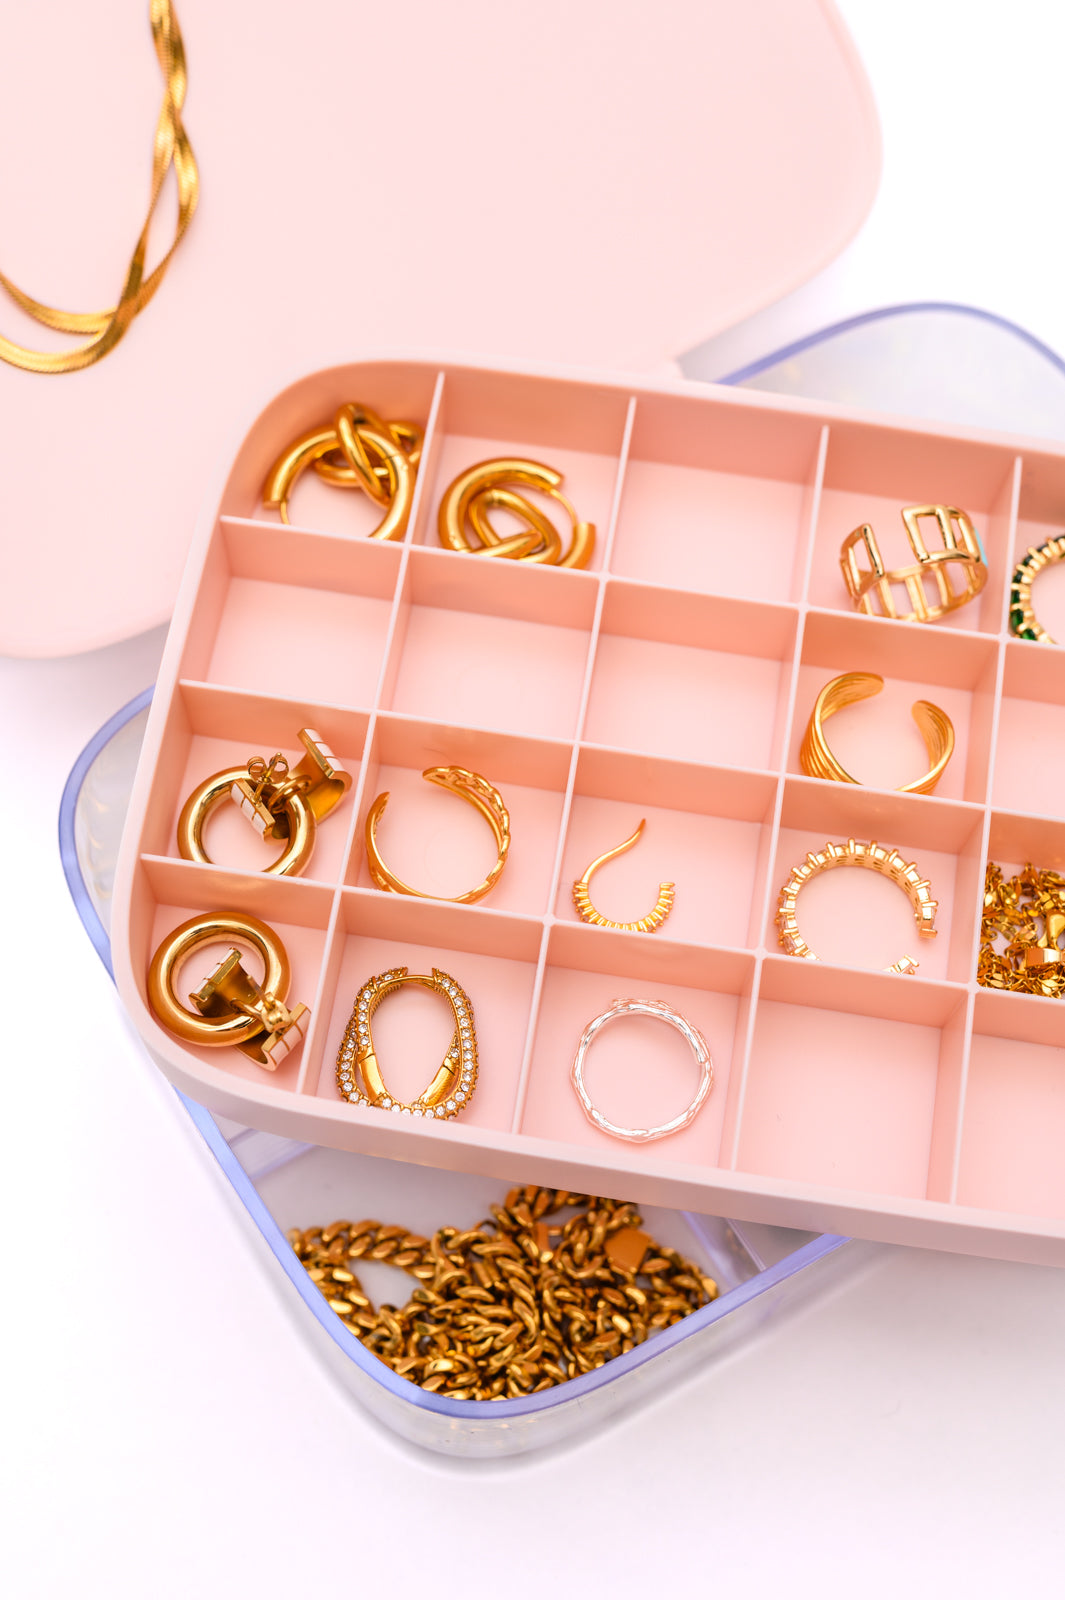 All Sorted Out Jewelry Storage Case | Pink